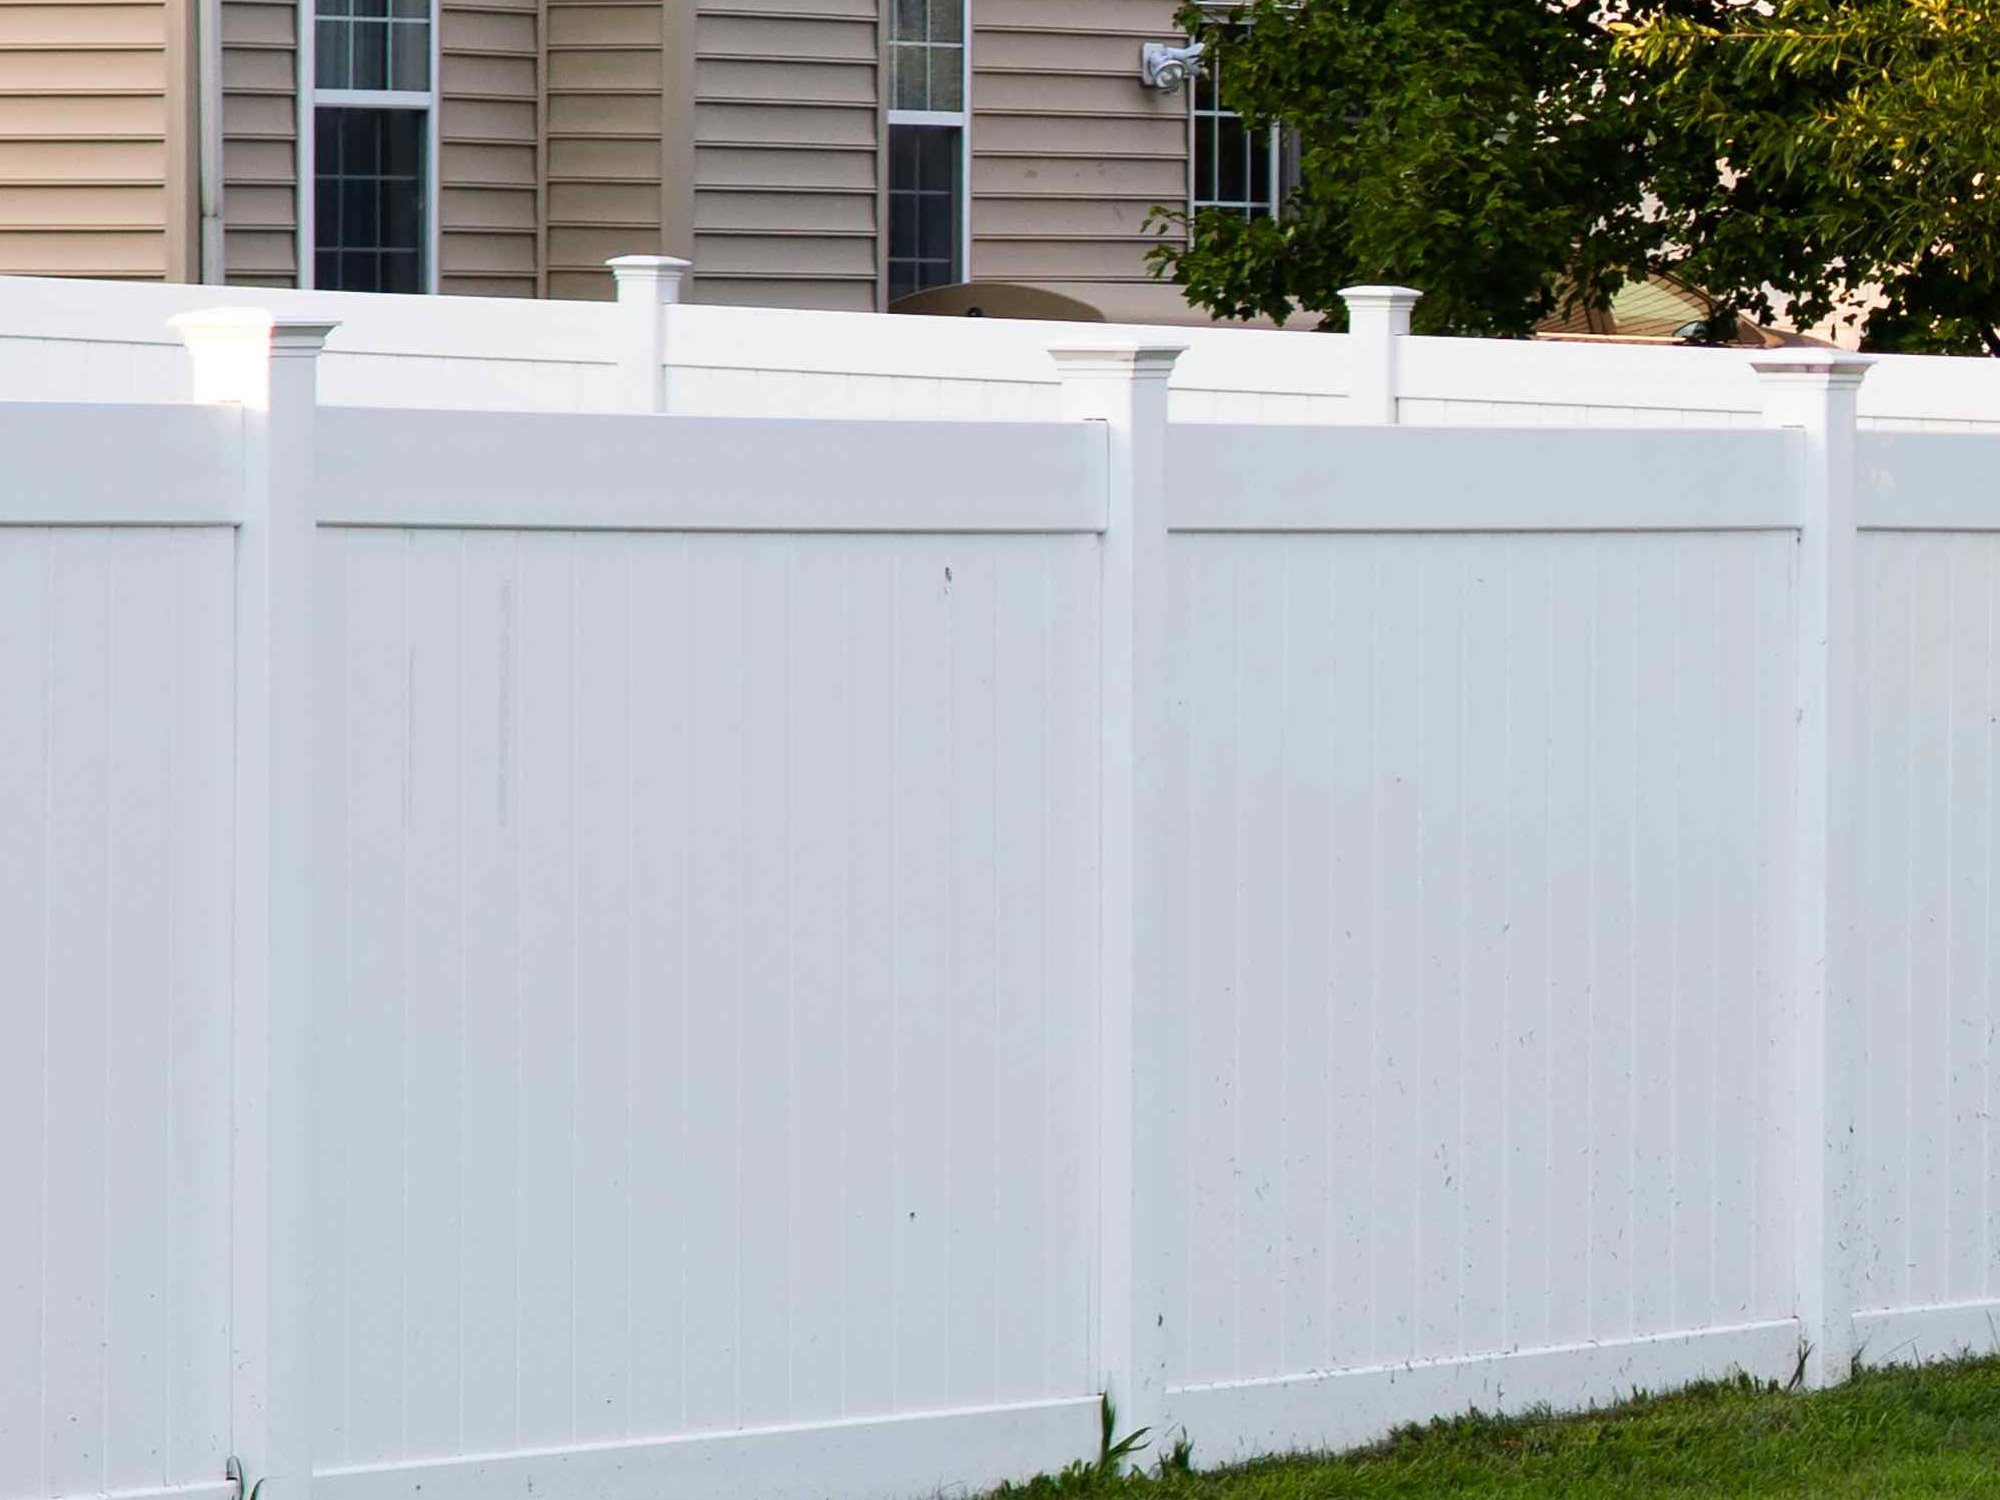 Vinyl fence solutions for the Rowesville, South Carolina area